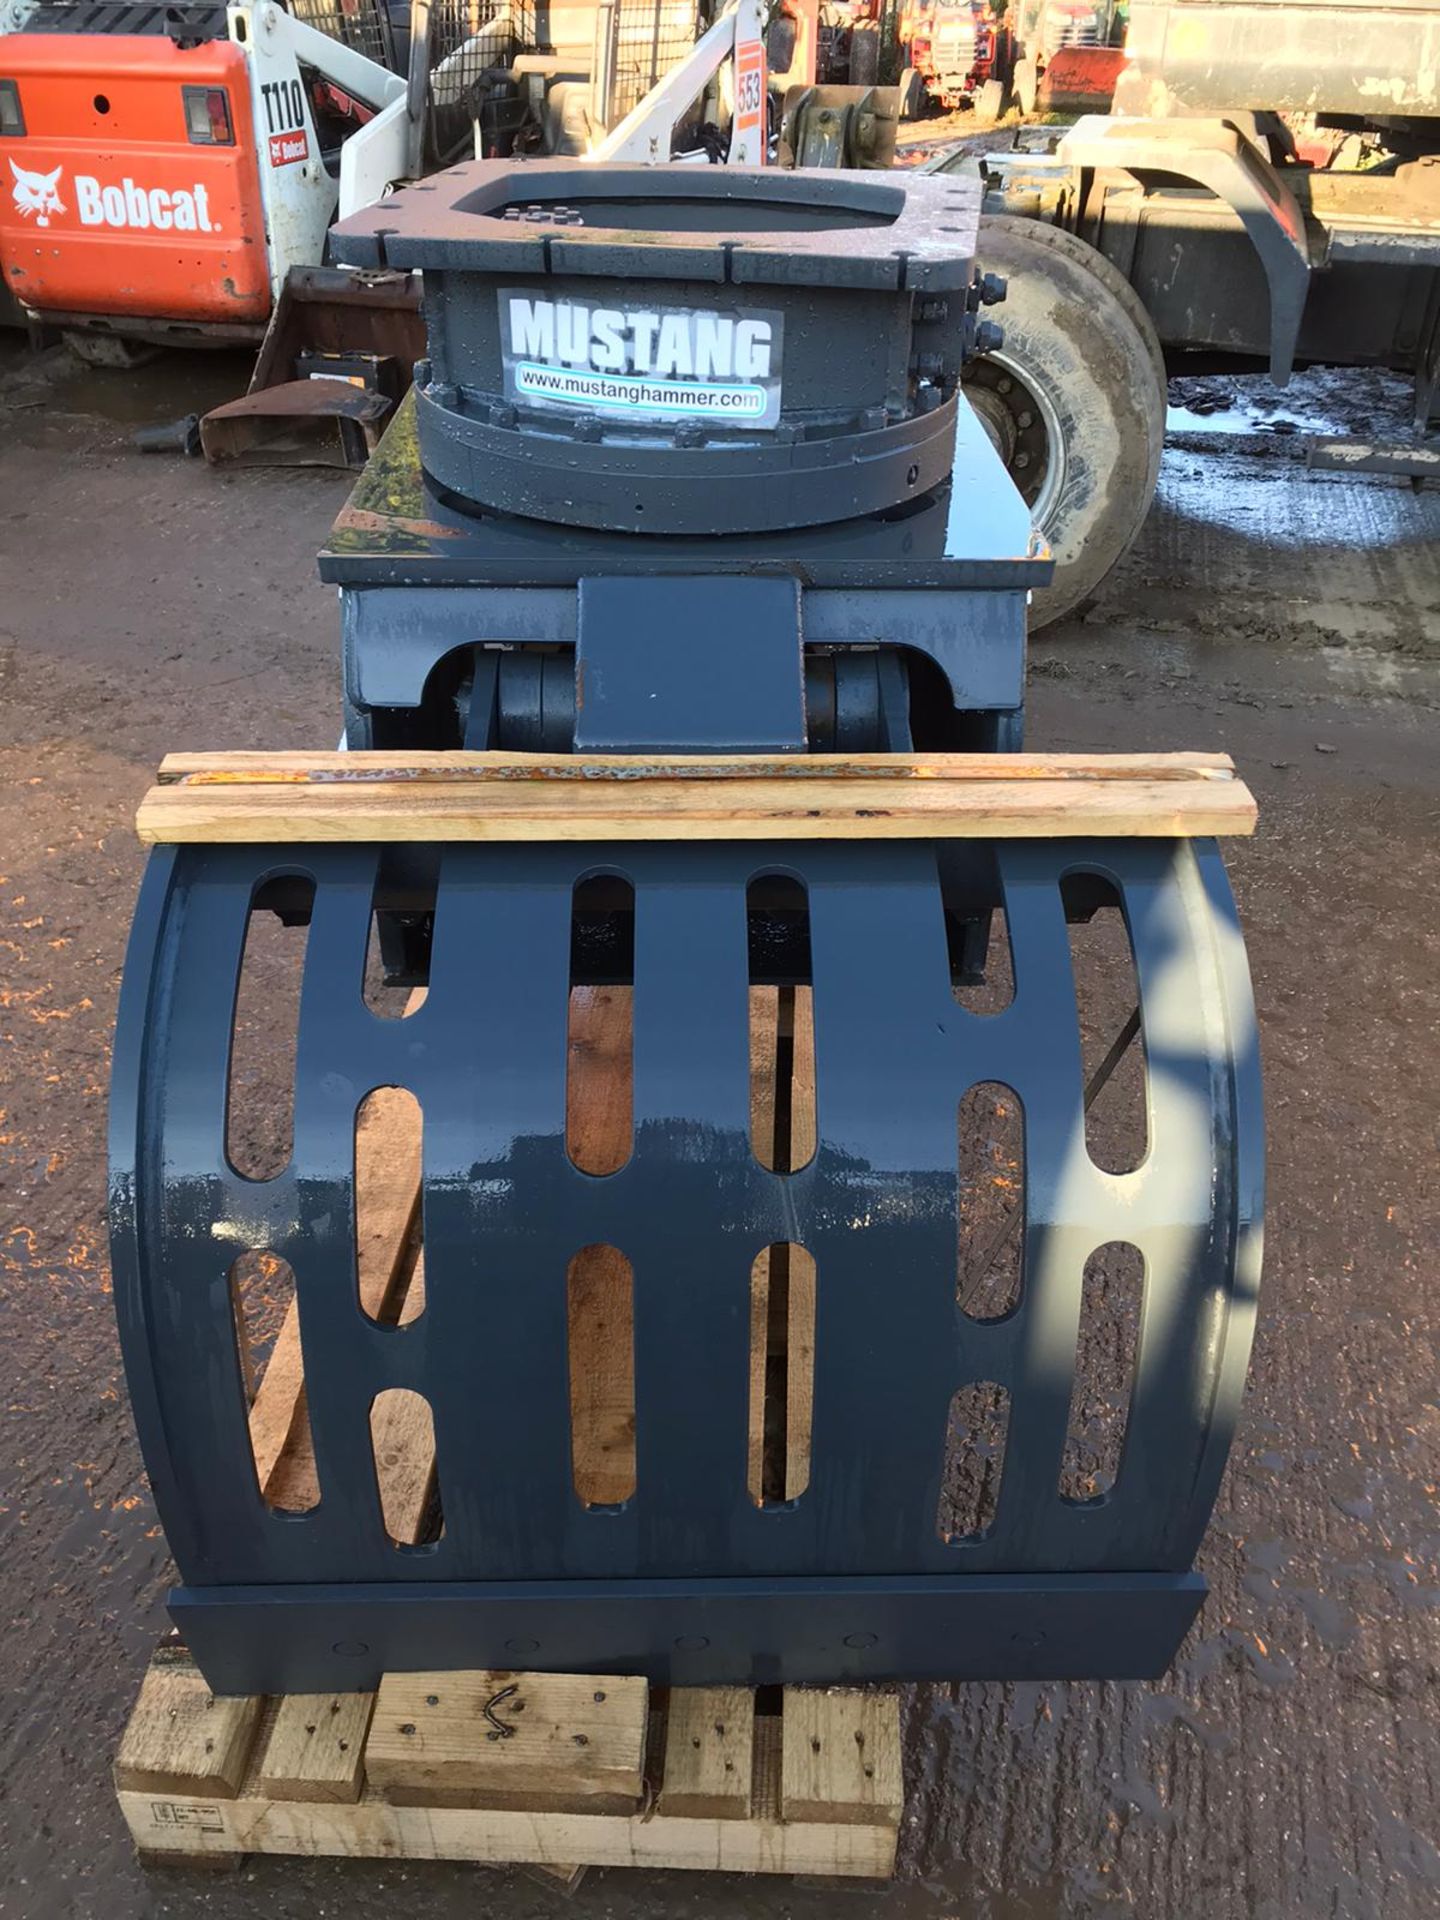 MUSTANG GRP1000 ROTATING GRAPPLE, YEAR 2019, NEW AND UNUSED - TO SUIT 13-19 TON EXCAVATOR *PLUS VAT* - Image 5 of 6